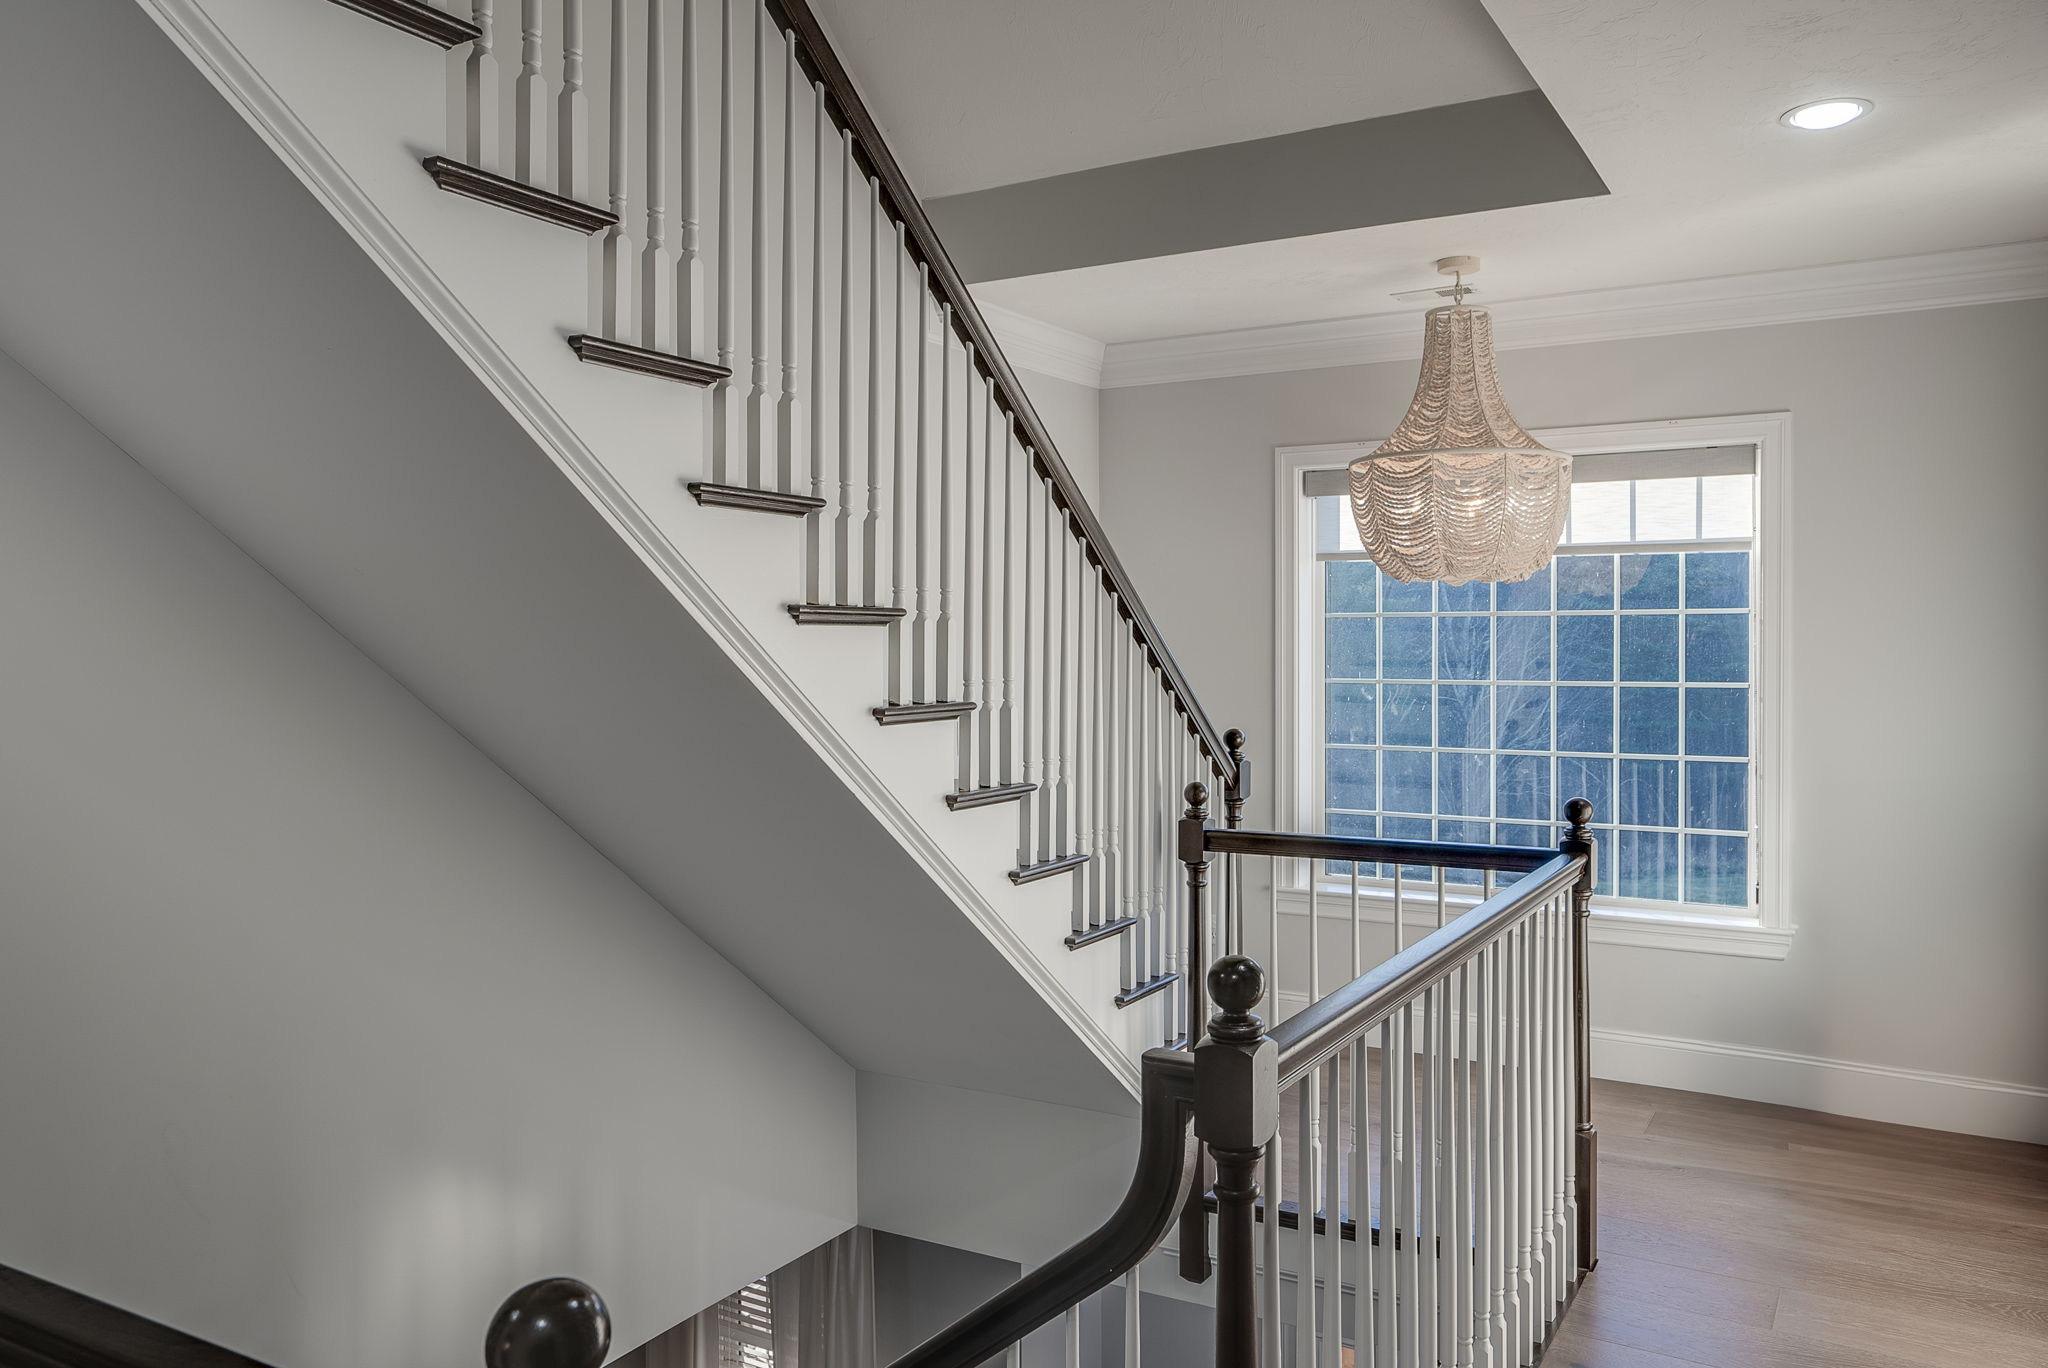 Designer Chandelier lights the landing to the third story